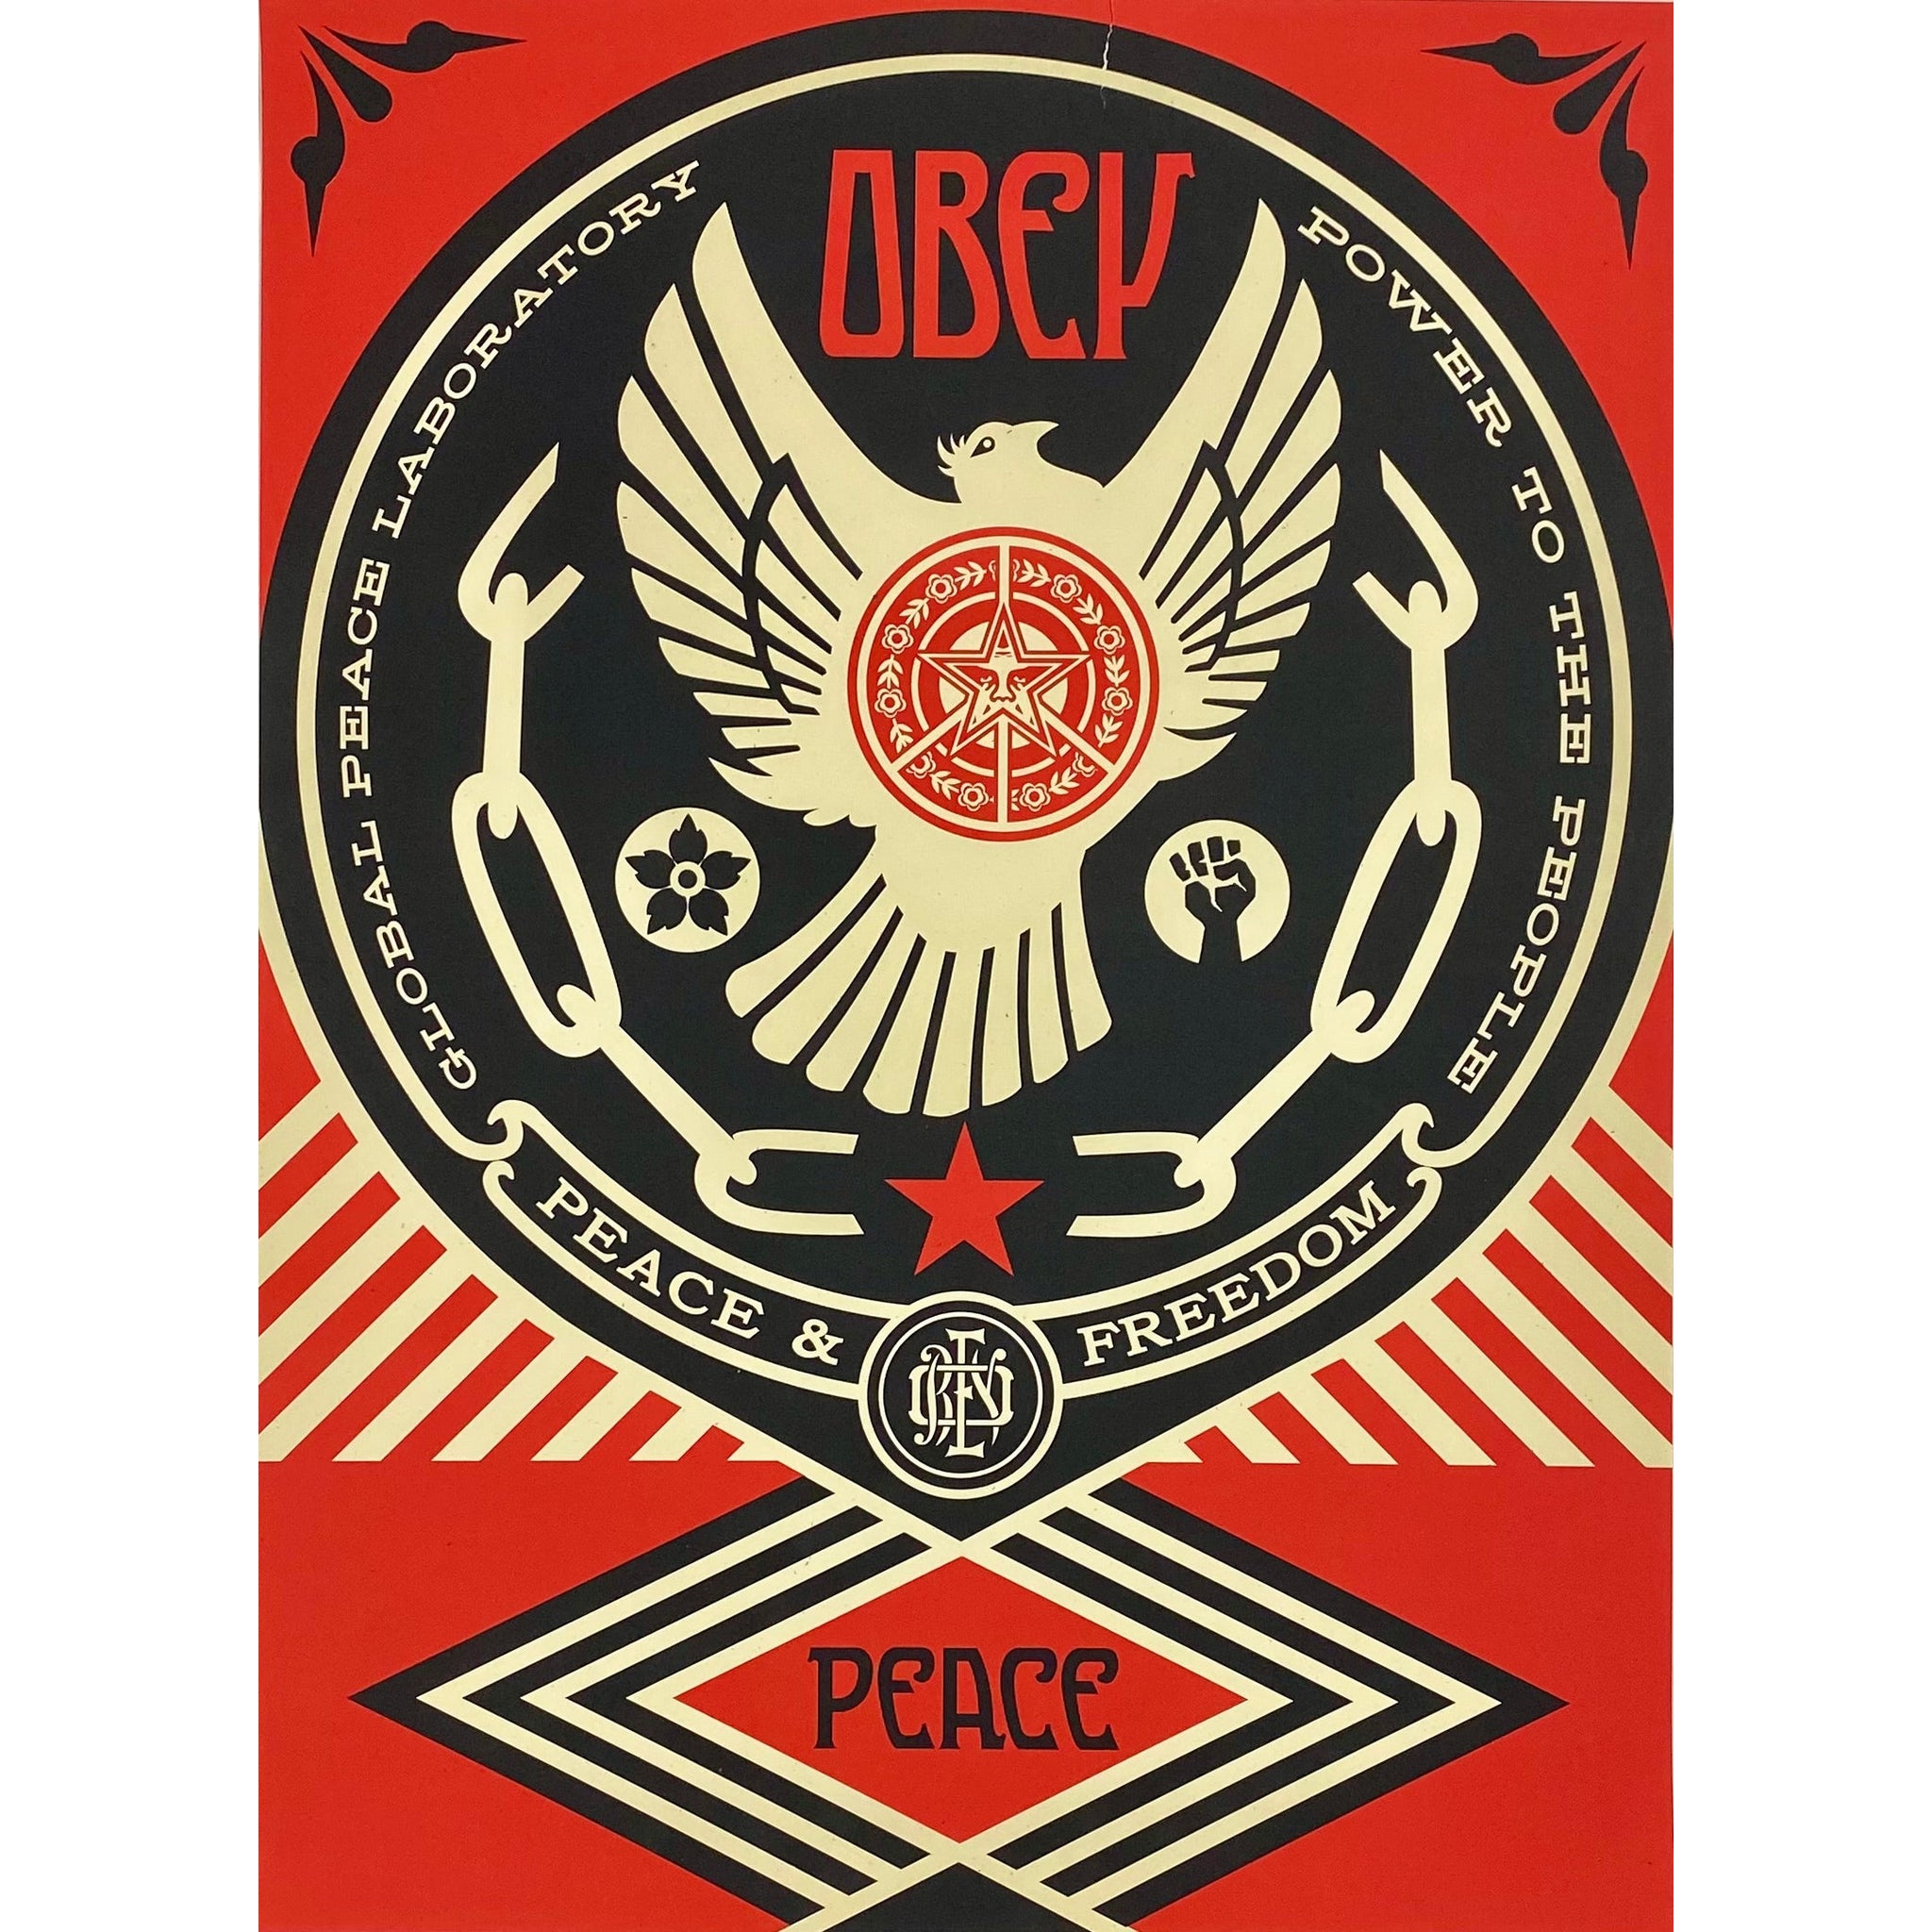 SHEPARD FAIREY (OBEY GIANT) - 2014 - PEACE & FREEDOM DOVE (PASTER)